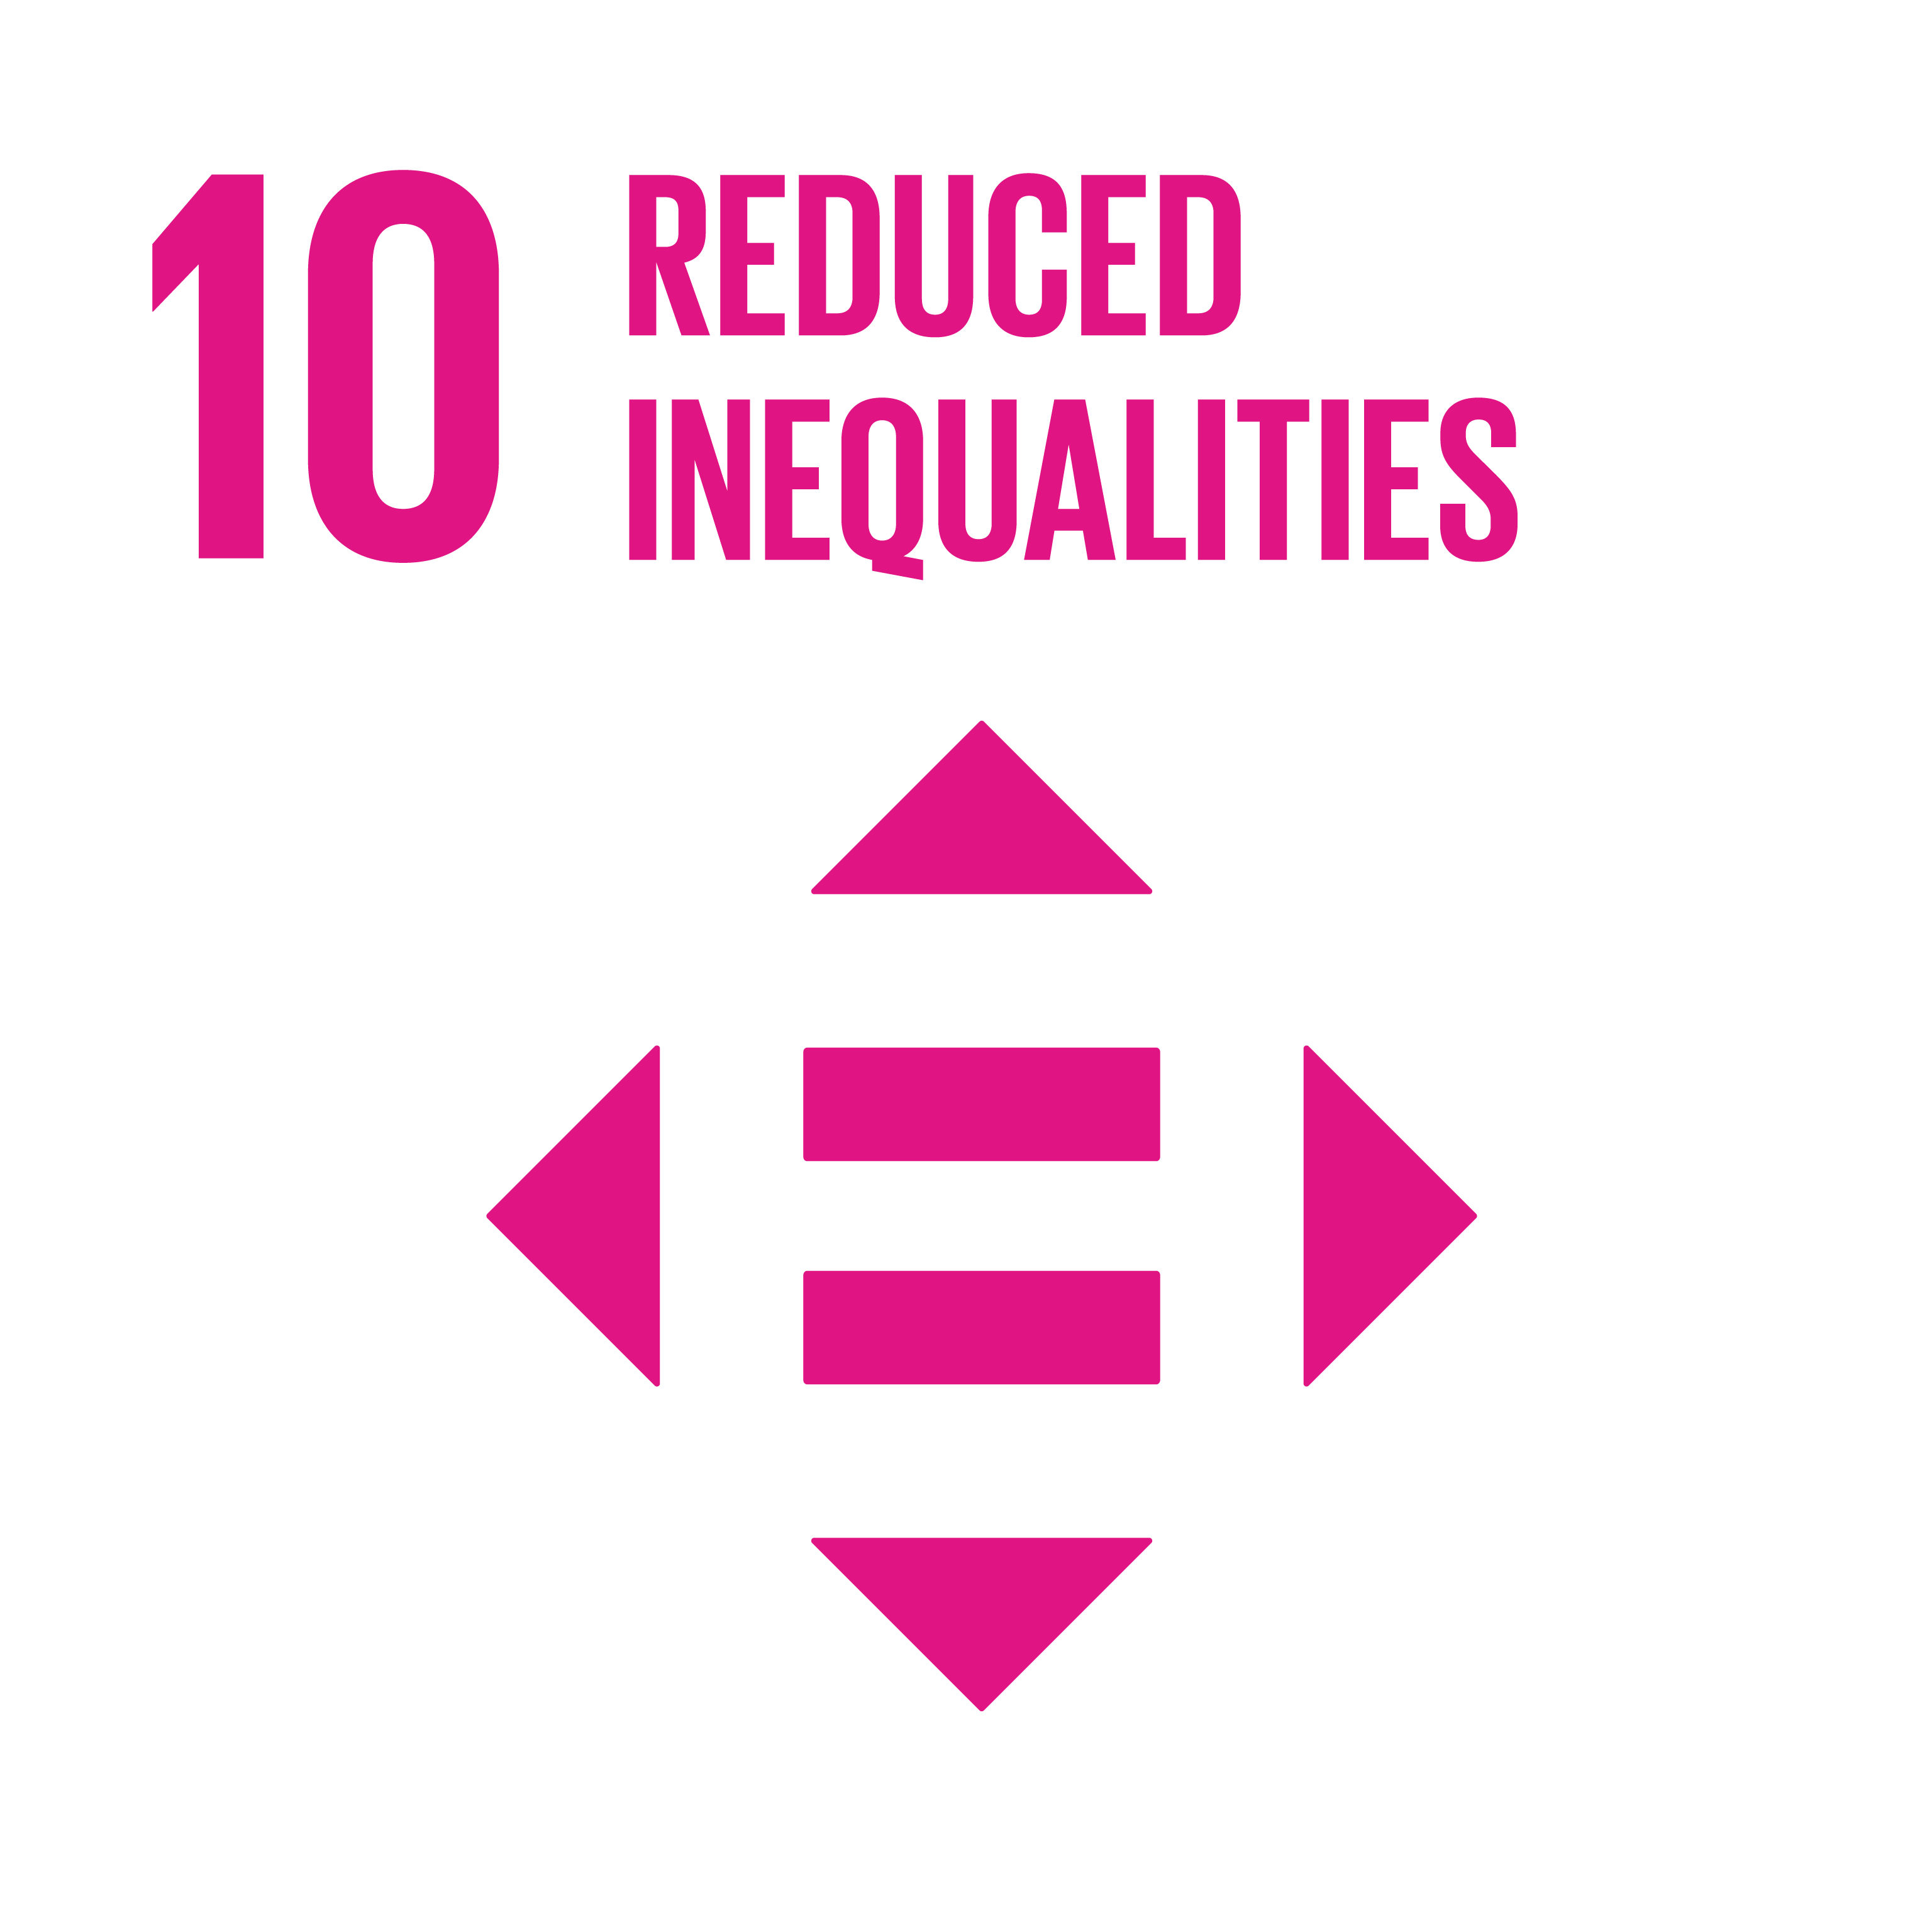 Reduce inequality within and among countries